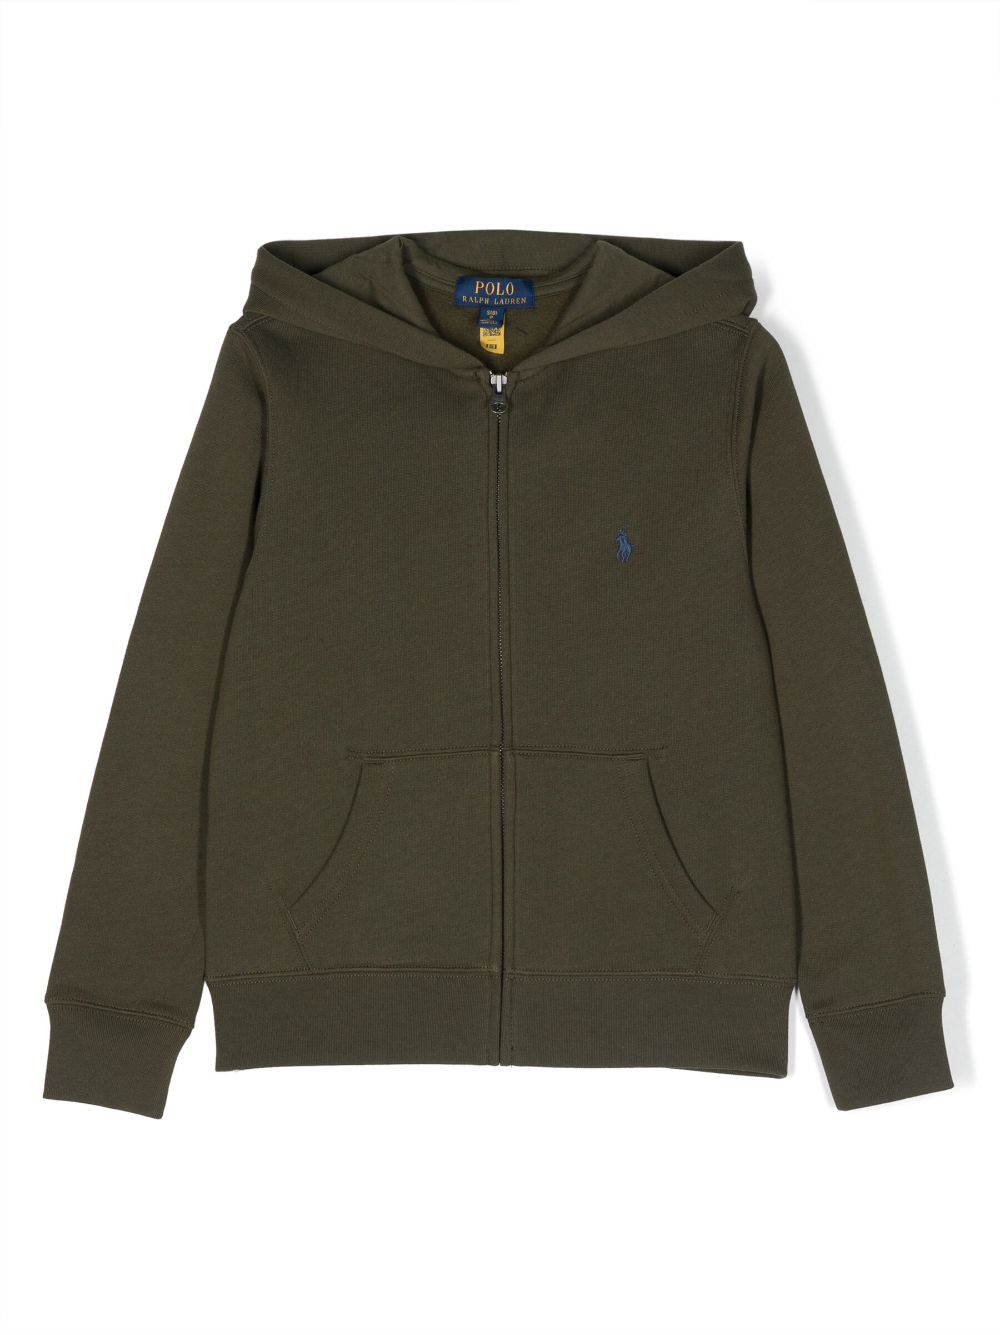 RALPH LAUREN POLO PONY EMBROIDERED HOODIE